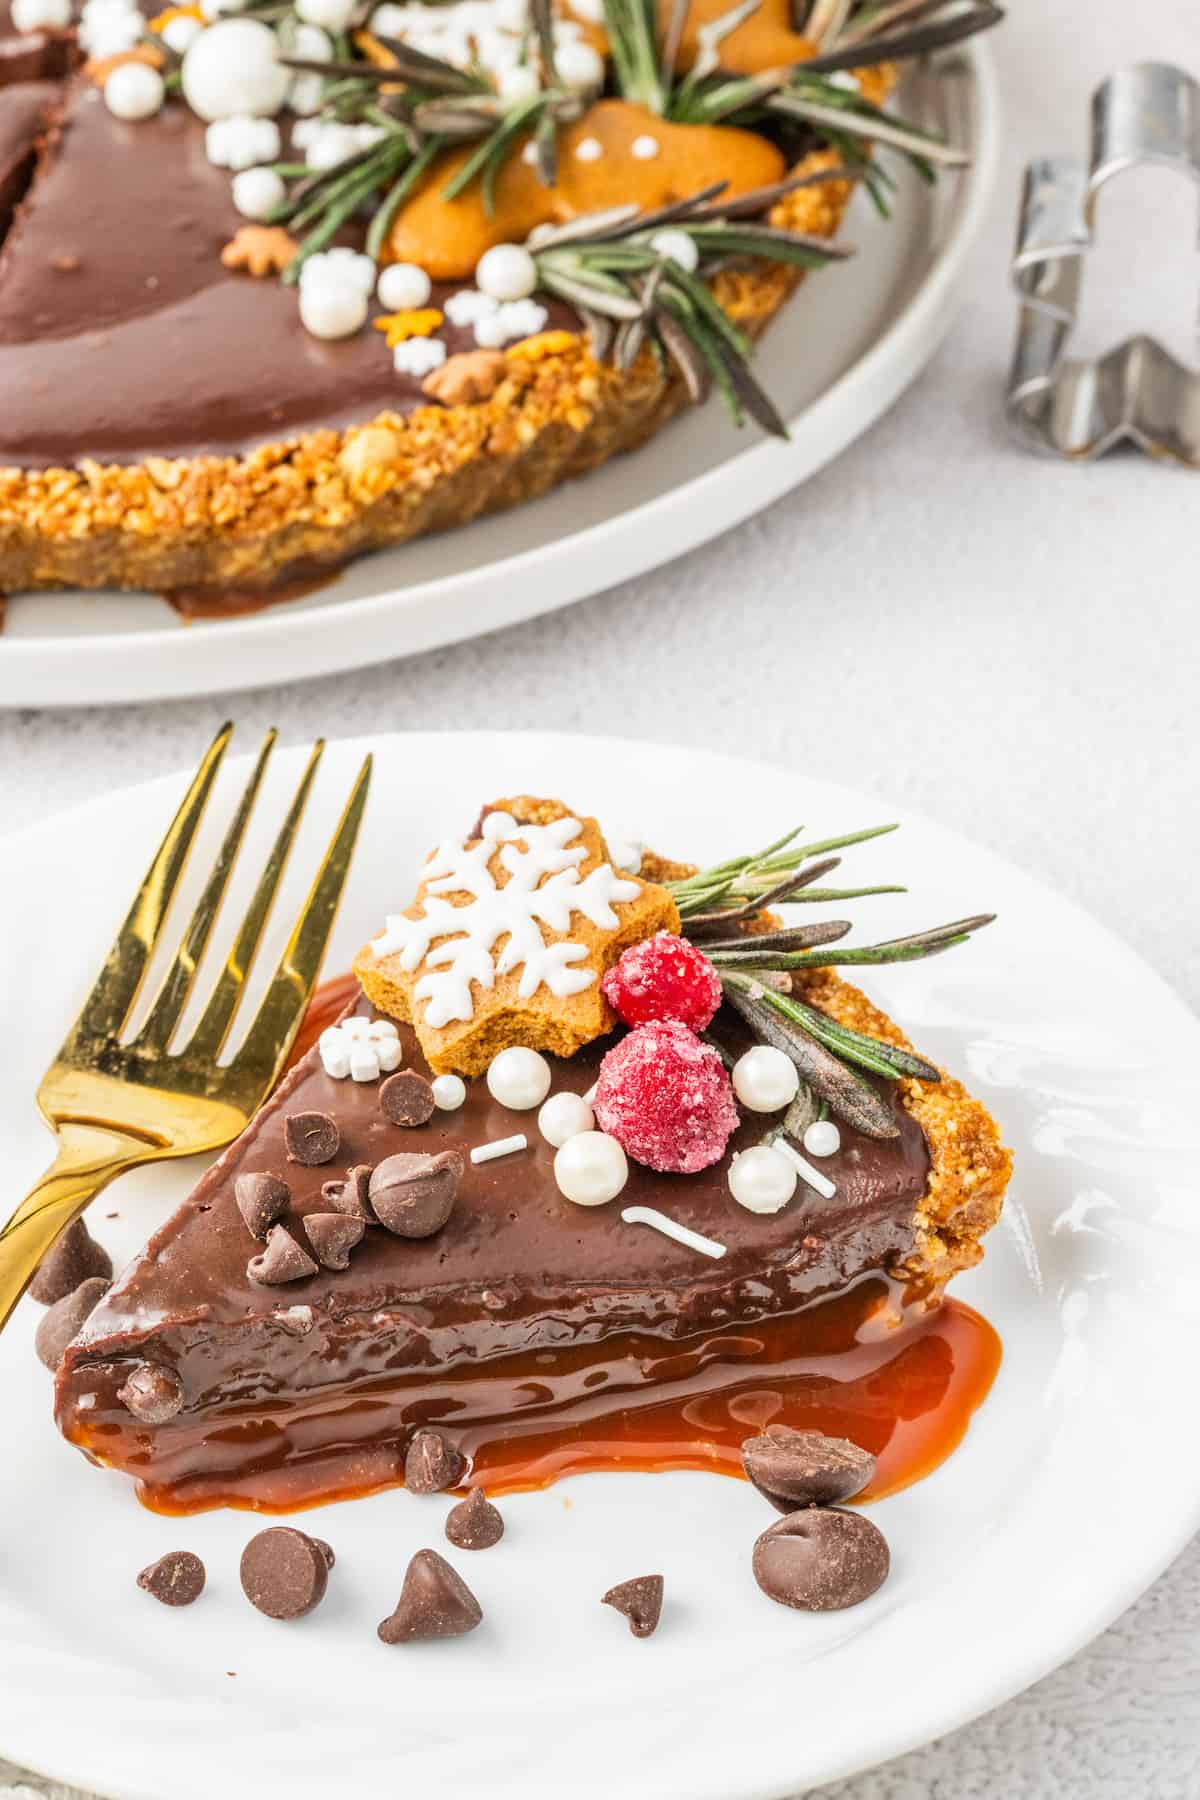 A slice of chocolate caramel pie is sitting on a plate.